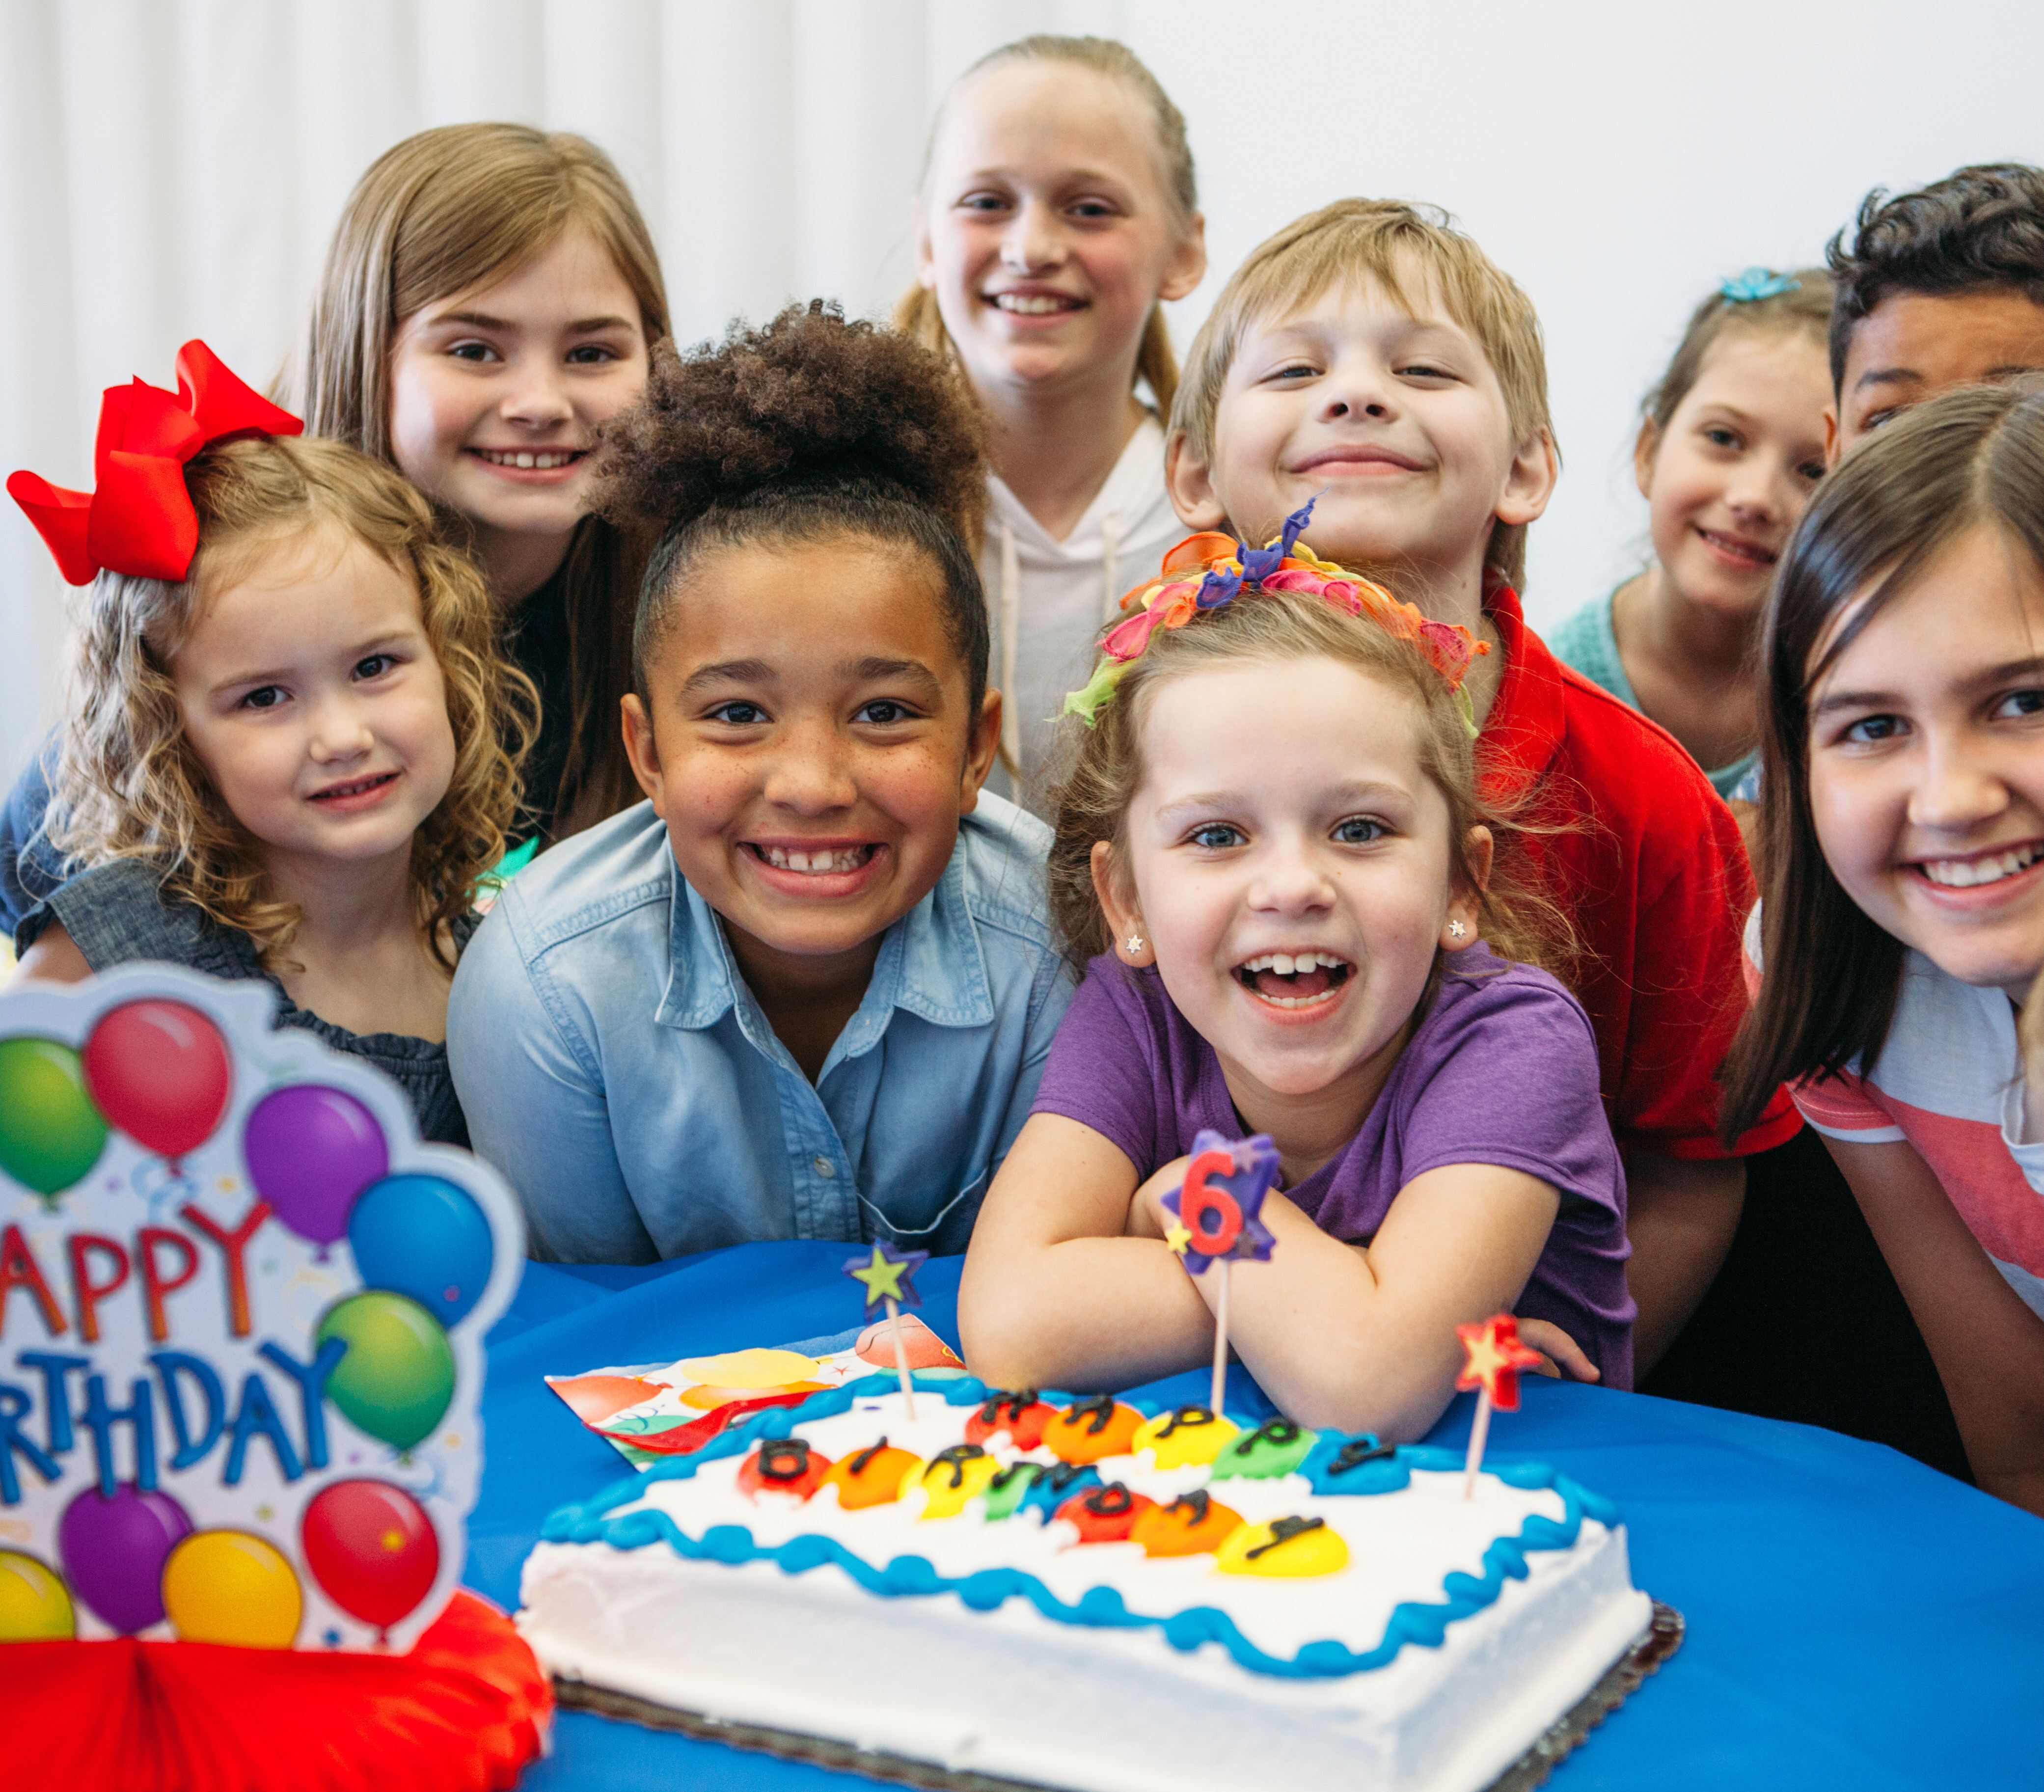 Zoom Birthday Party Ideas For Kids Outlets Online, Save 65% | jlcatj.gob.mx